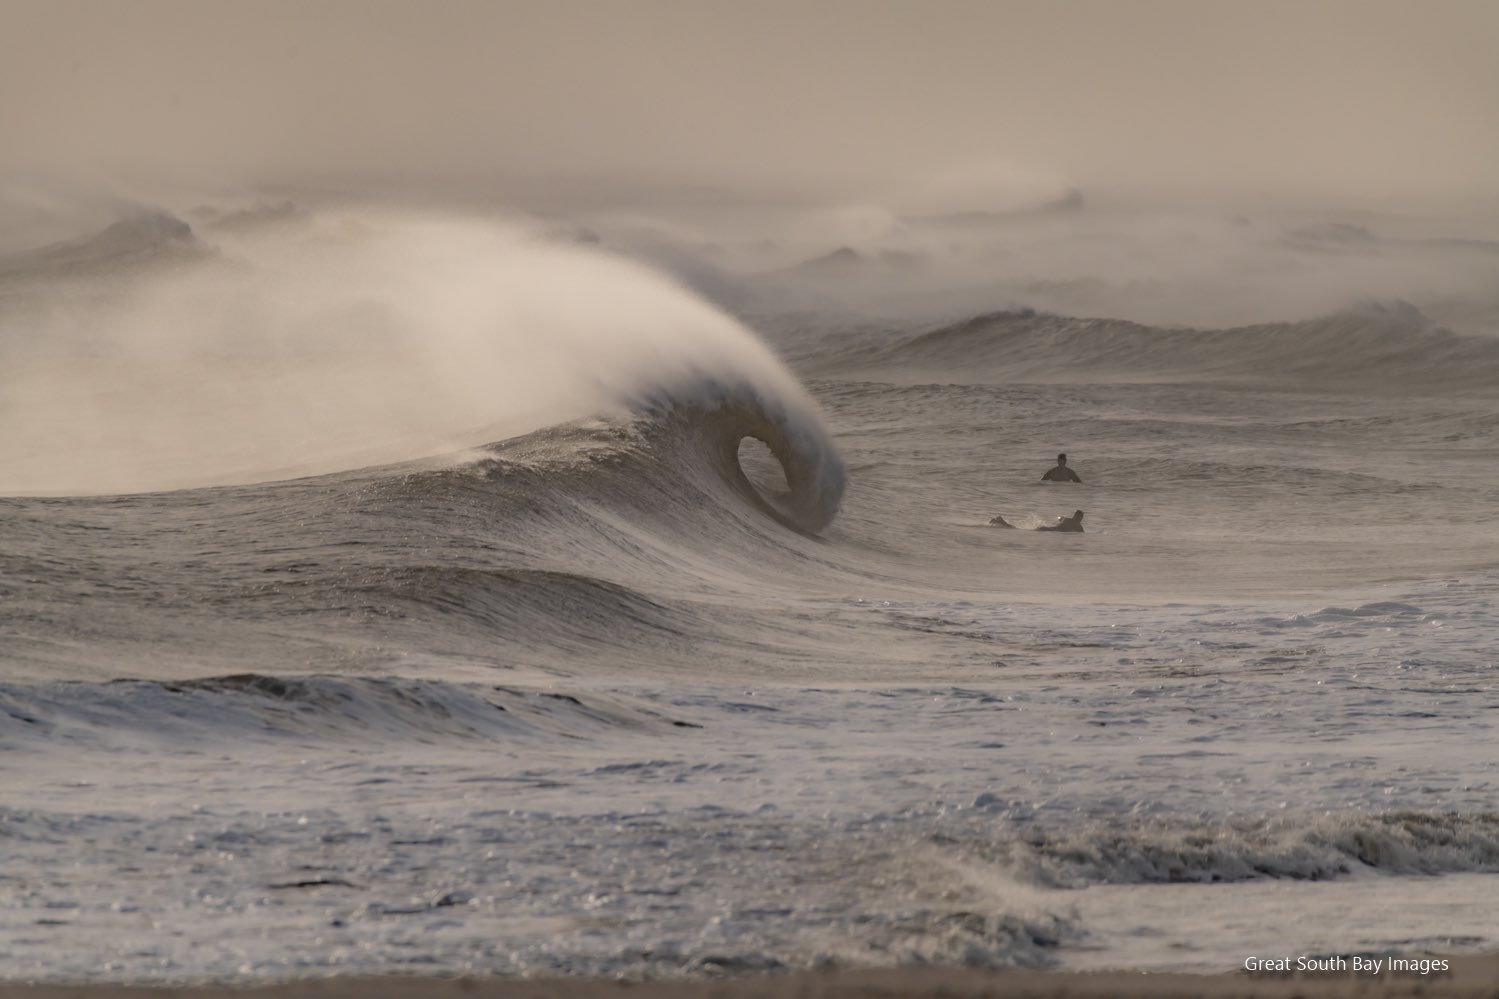 2nd Place Winter Storm Surf, Long Island NY by GSB Images @GSBImagesMBusch